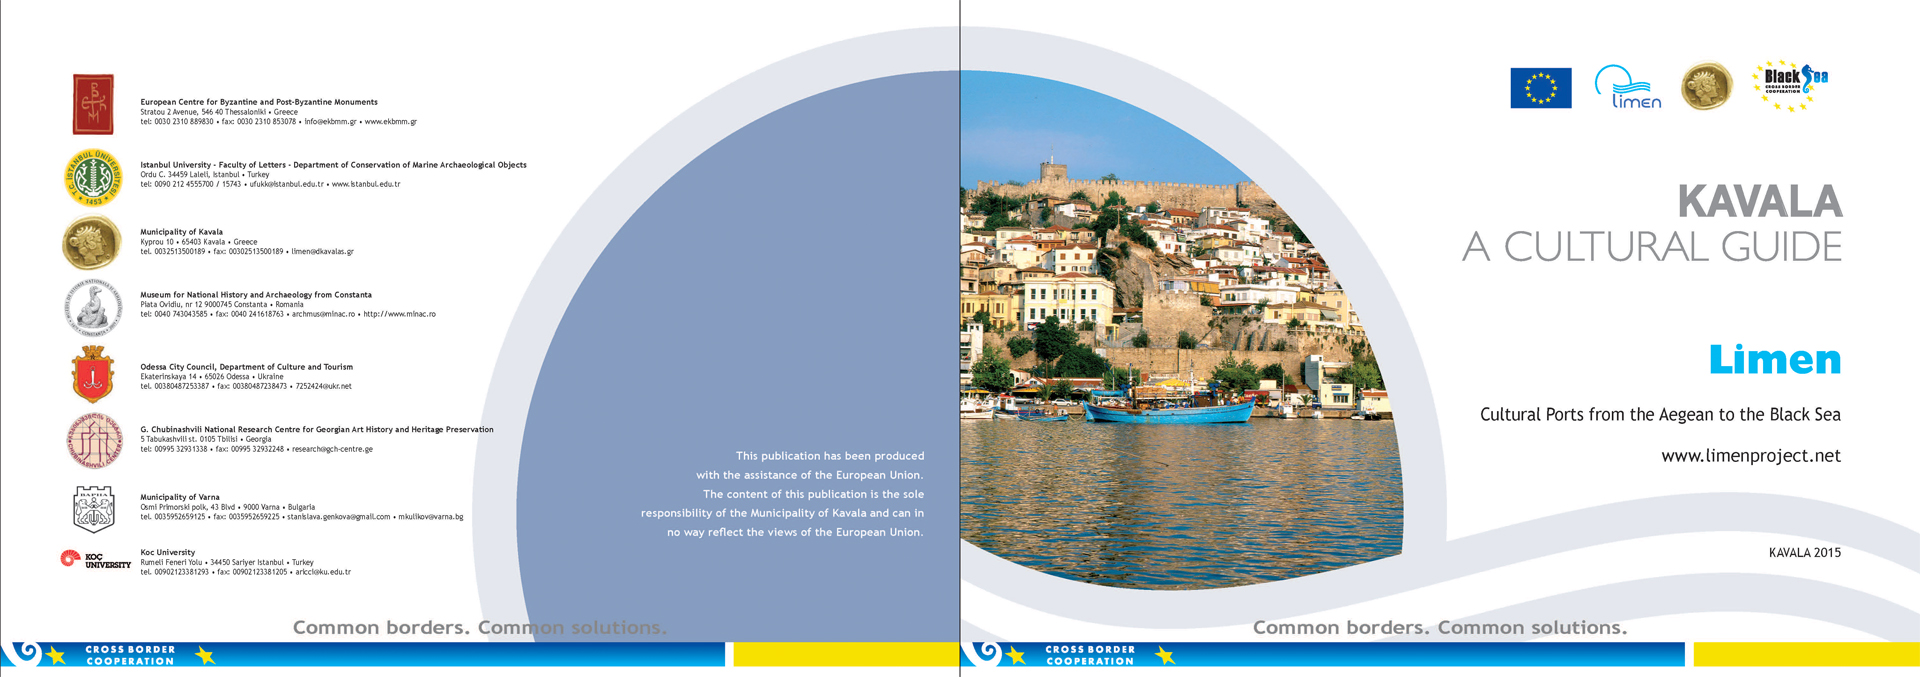 kavala 210X148 cover english FOR SITE ZIP